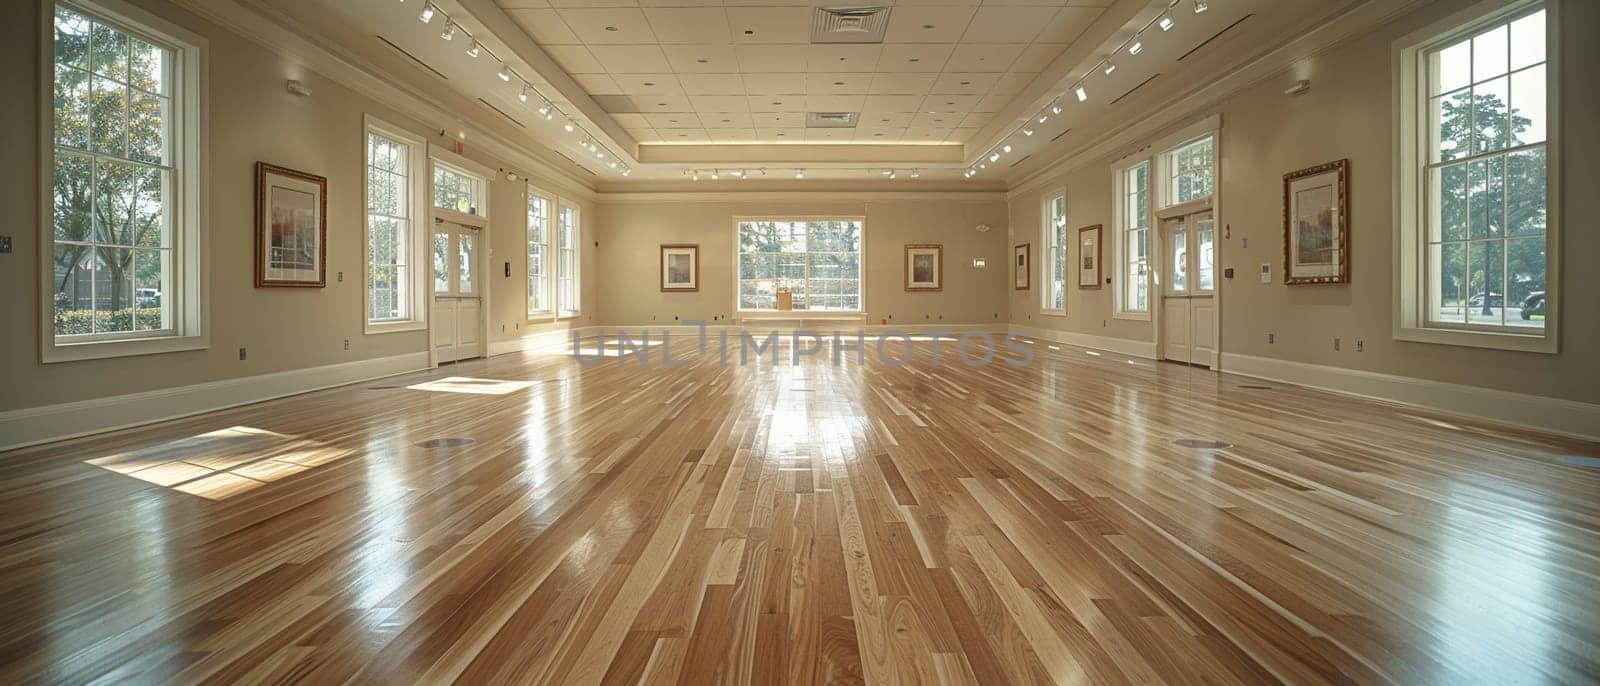 Dance Studio Mirrors Reflect Passion and Precision in Business of Art, Wooden floors and barres set the stage for the discipline and beauty of dance in business.